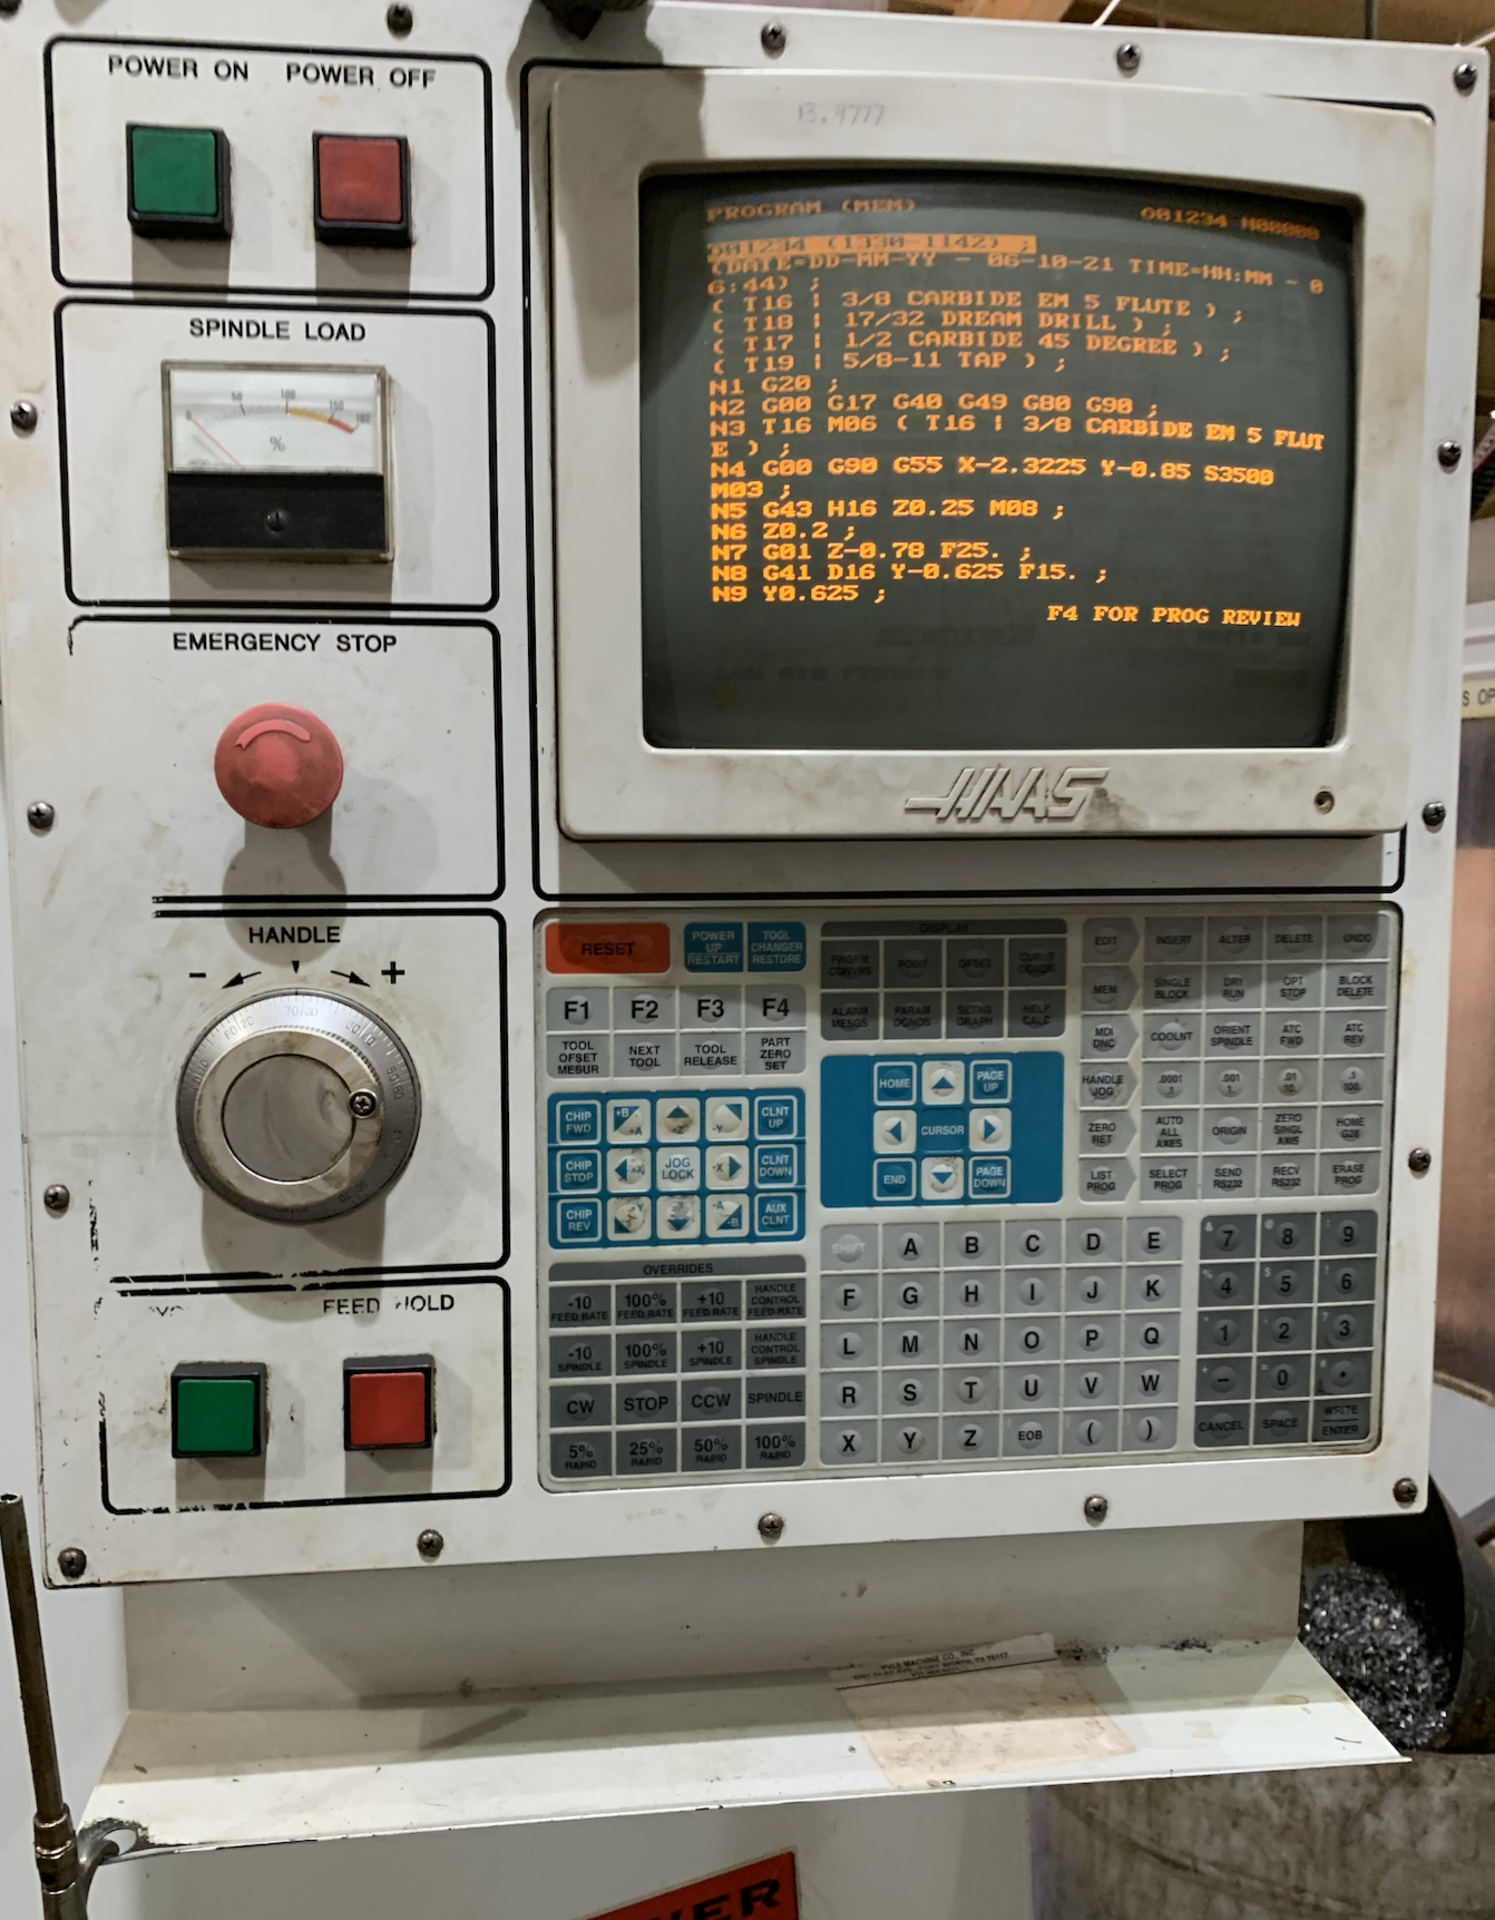 1997 HAAS VF-3 CNC MILL, HAAS CNC CTRL, 32 POSITION TOOL CHANGER, 18" X 48"TABLE - Image 4 of 5